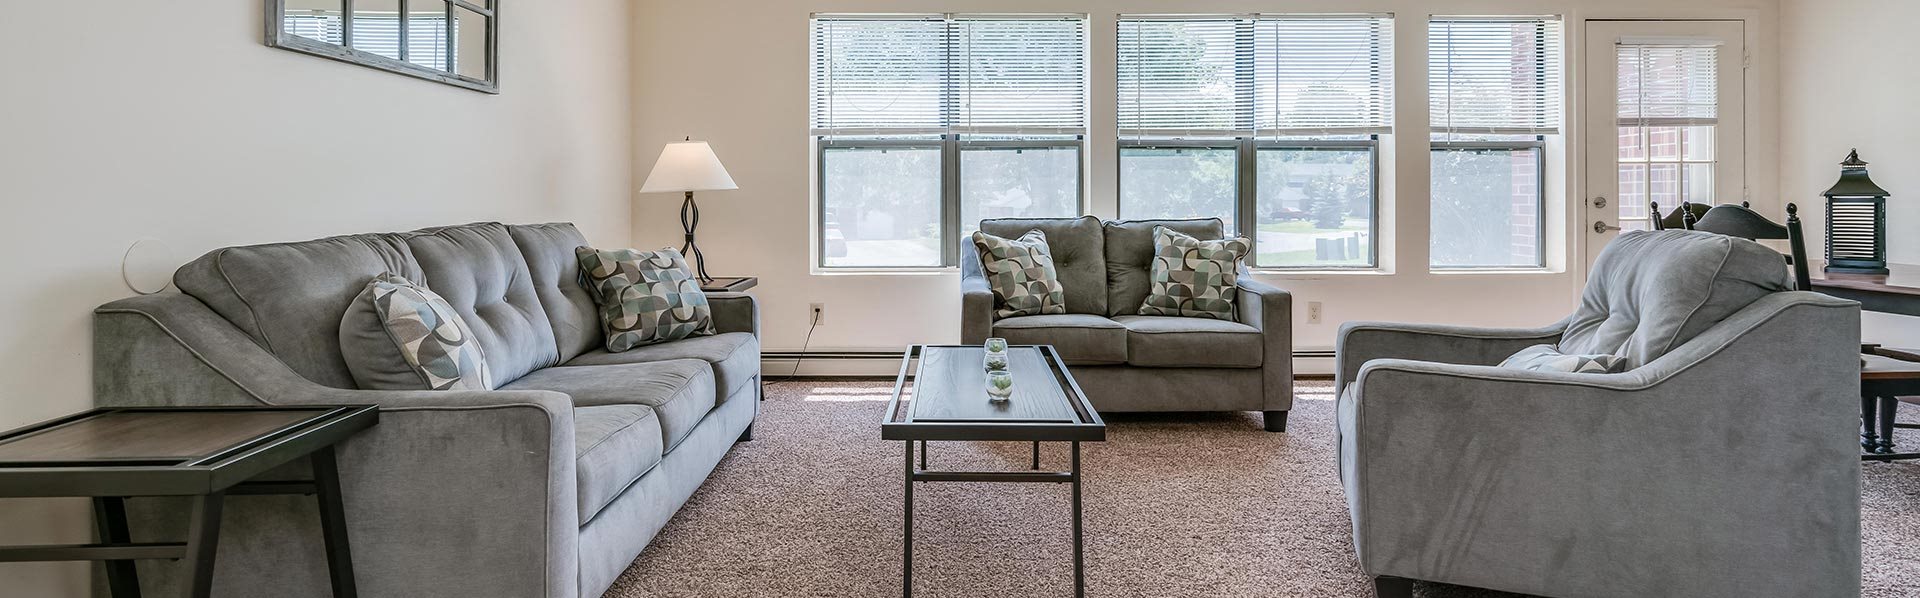 Parkstead Watertown at City Center living room image